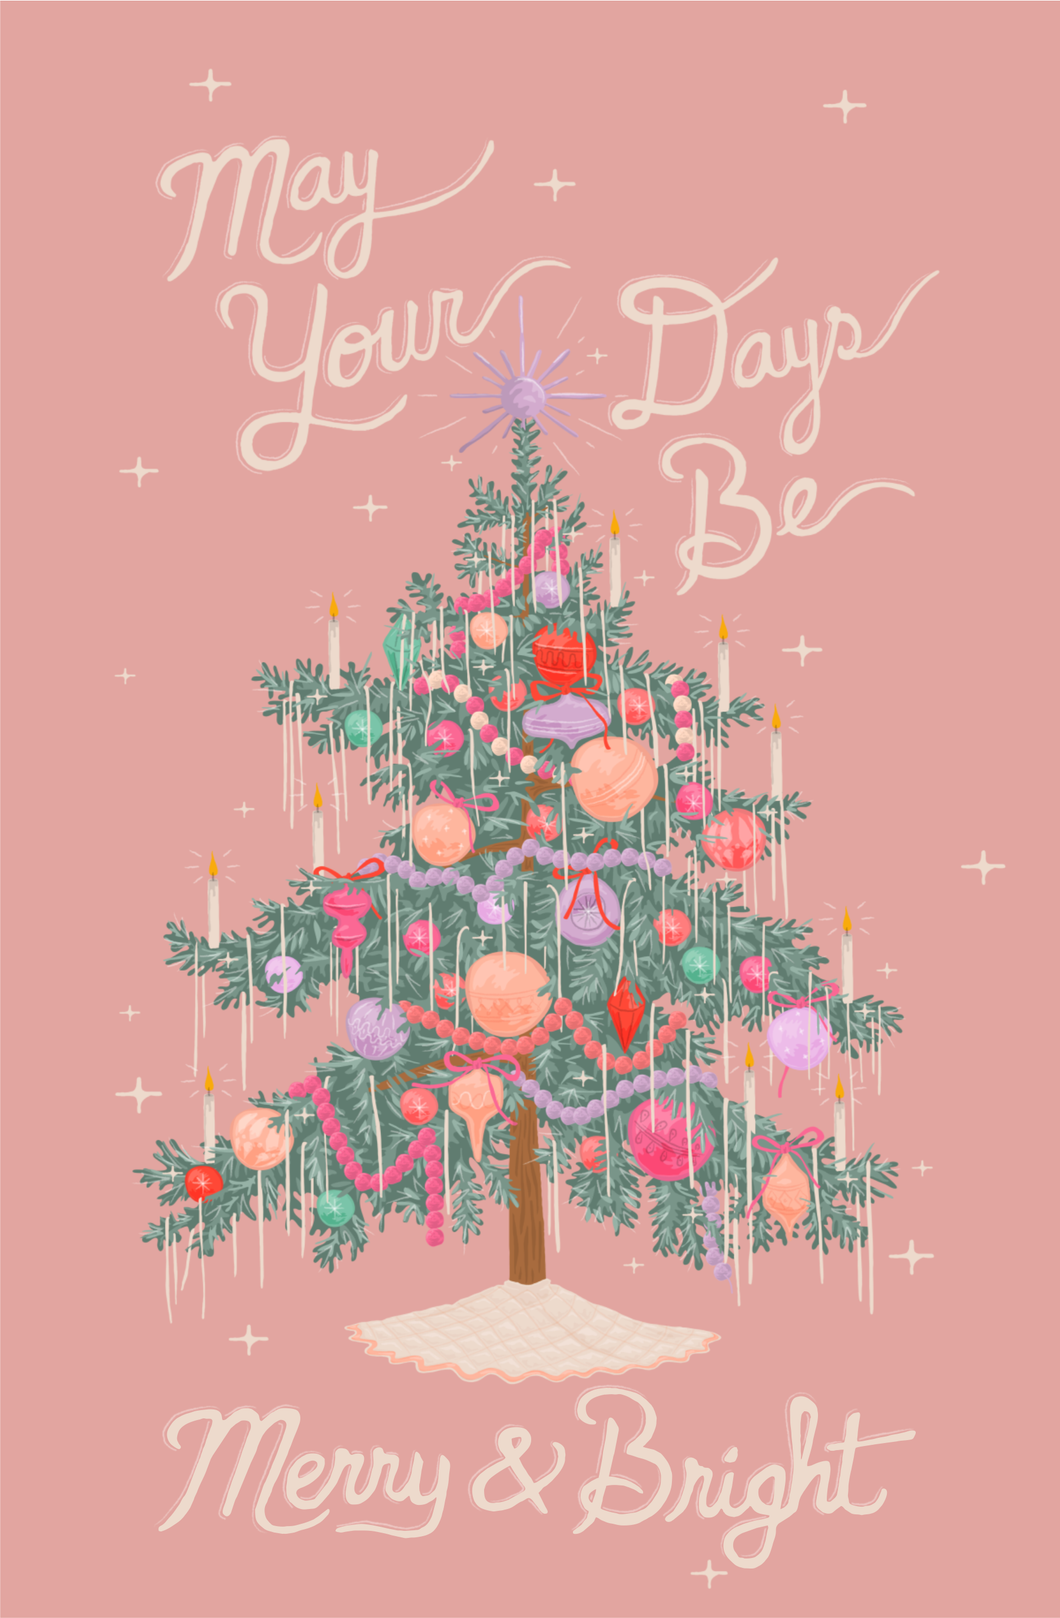 May your days Tree